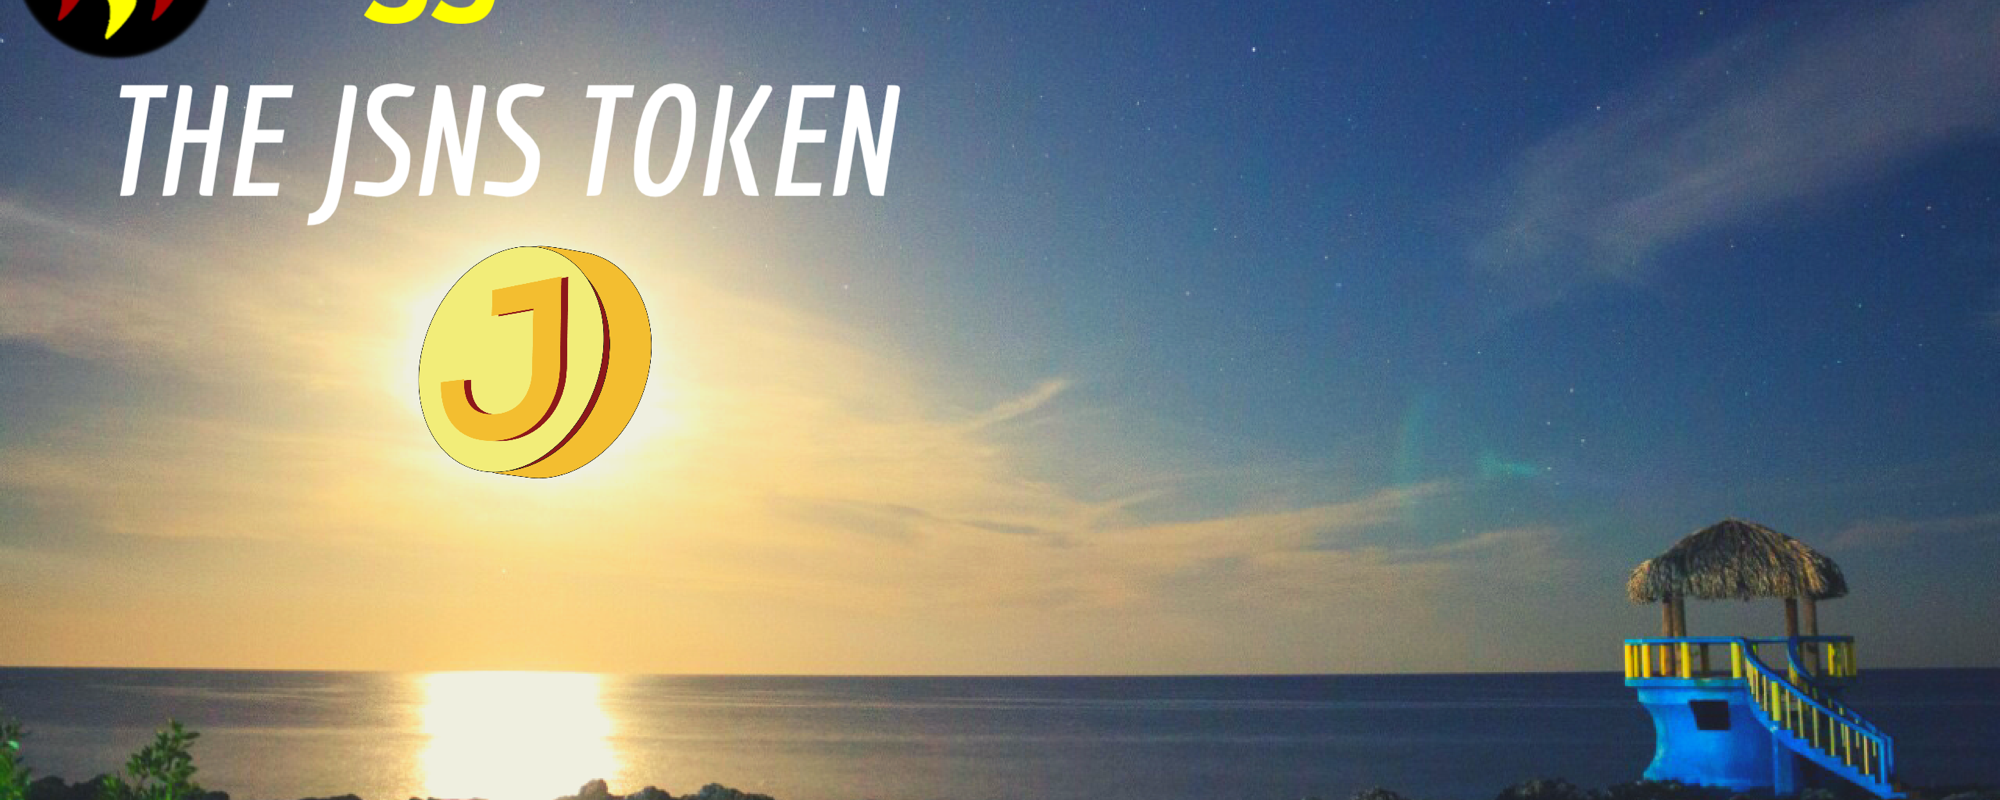 Introducing the JAHM Stake & Stay Token, Redeemable for a Vacation Package Courtesy of ReggaeSteem